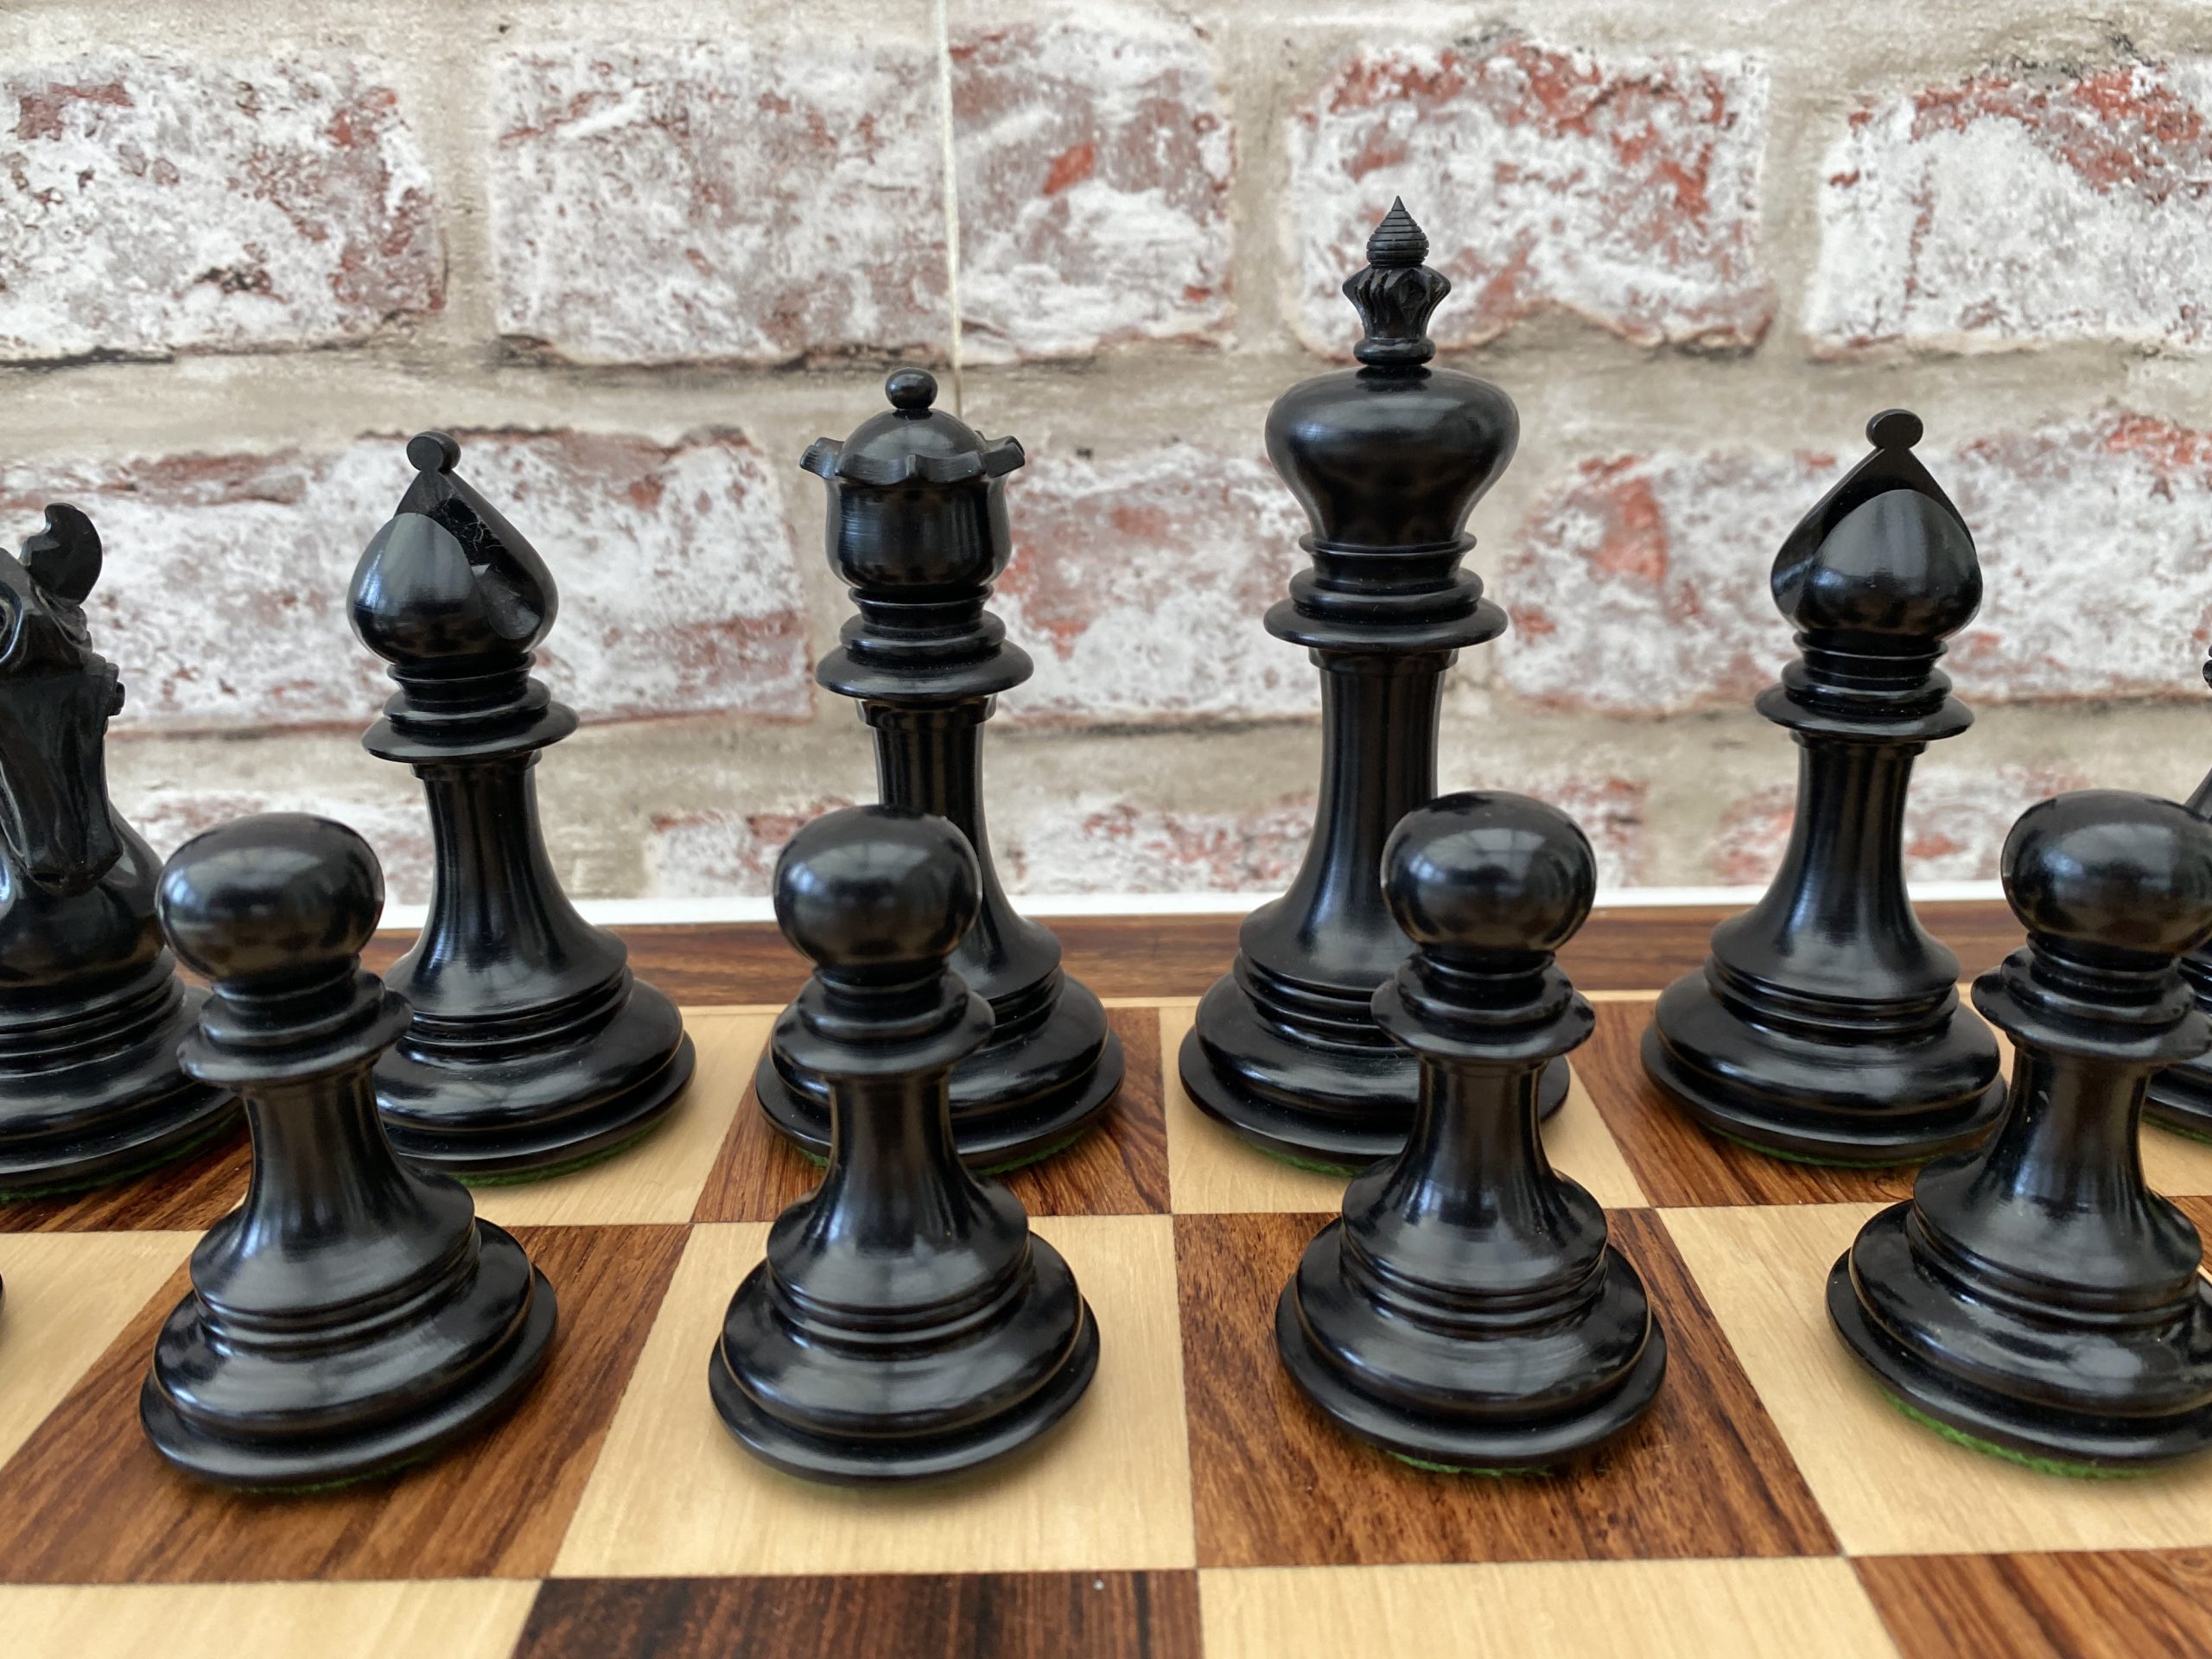 The Arabian - Triple Weighted Ebony Chess Pieces - ChessBaron Chess Sets  USA - Call (213) 325 6540